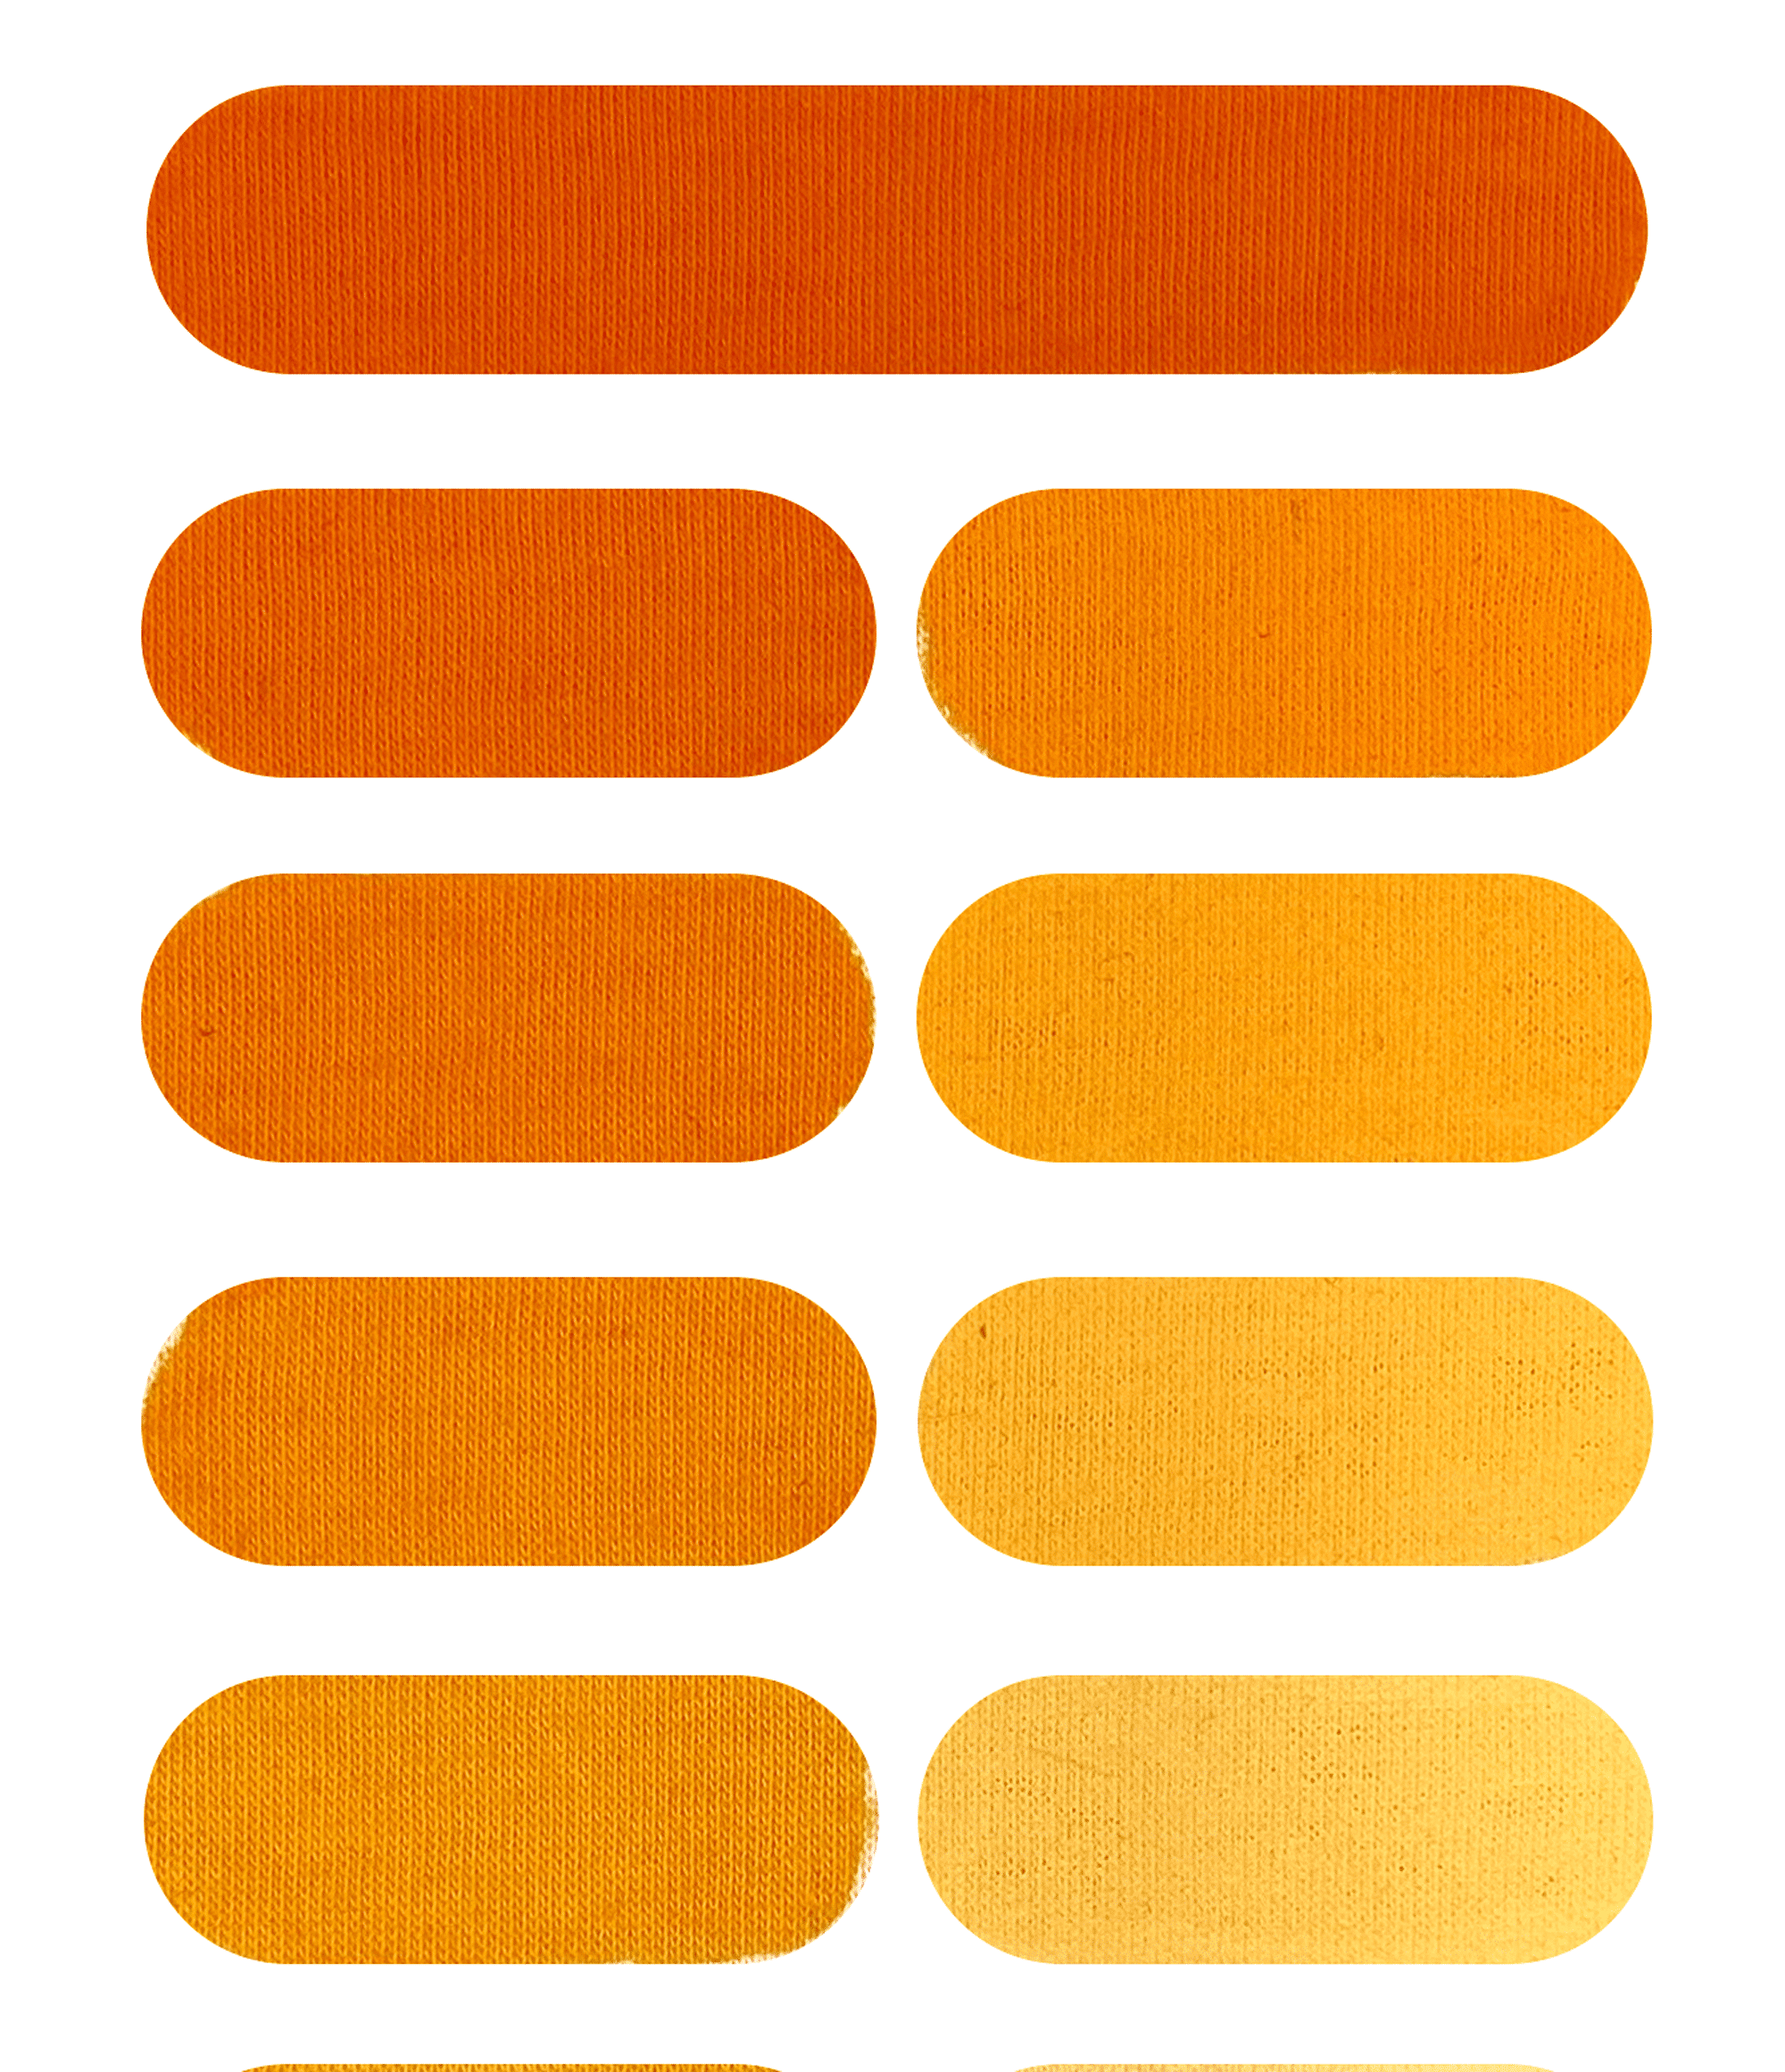 Image showing swatches of PERMASET Orange R reductions made with PERMASET Print Paste and PERMASET White at various concentrations